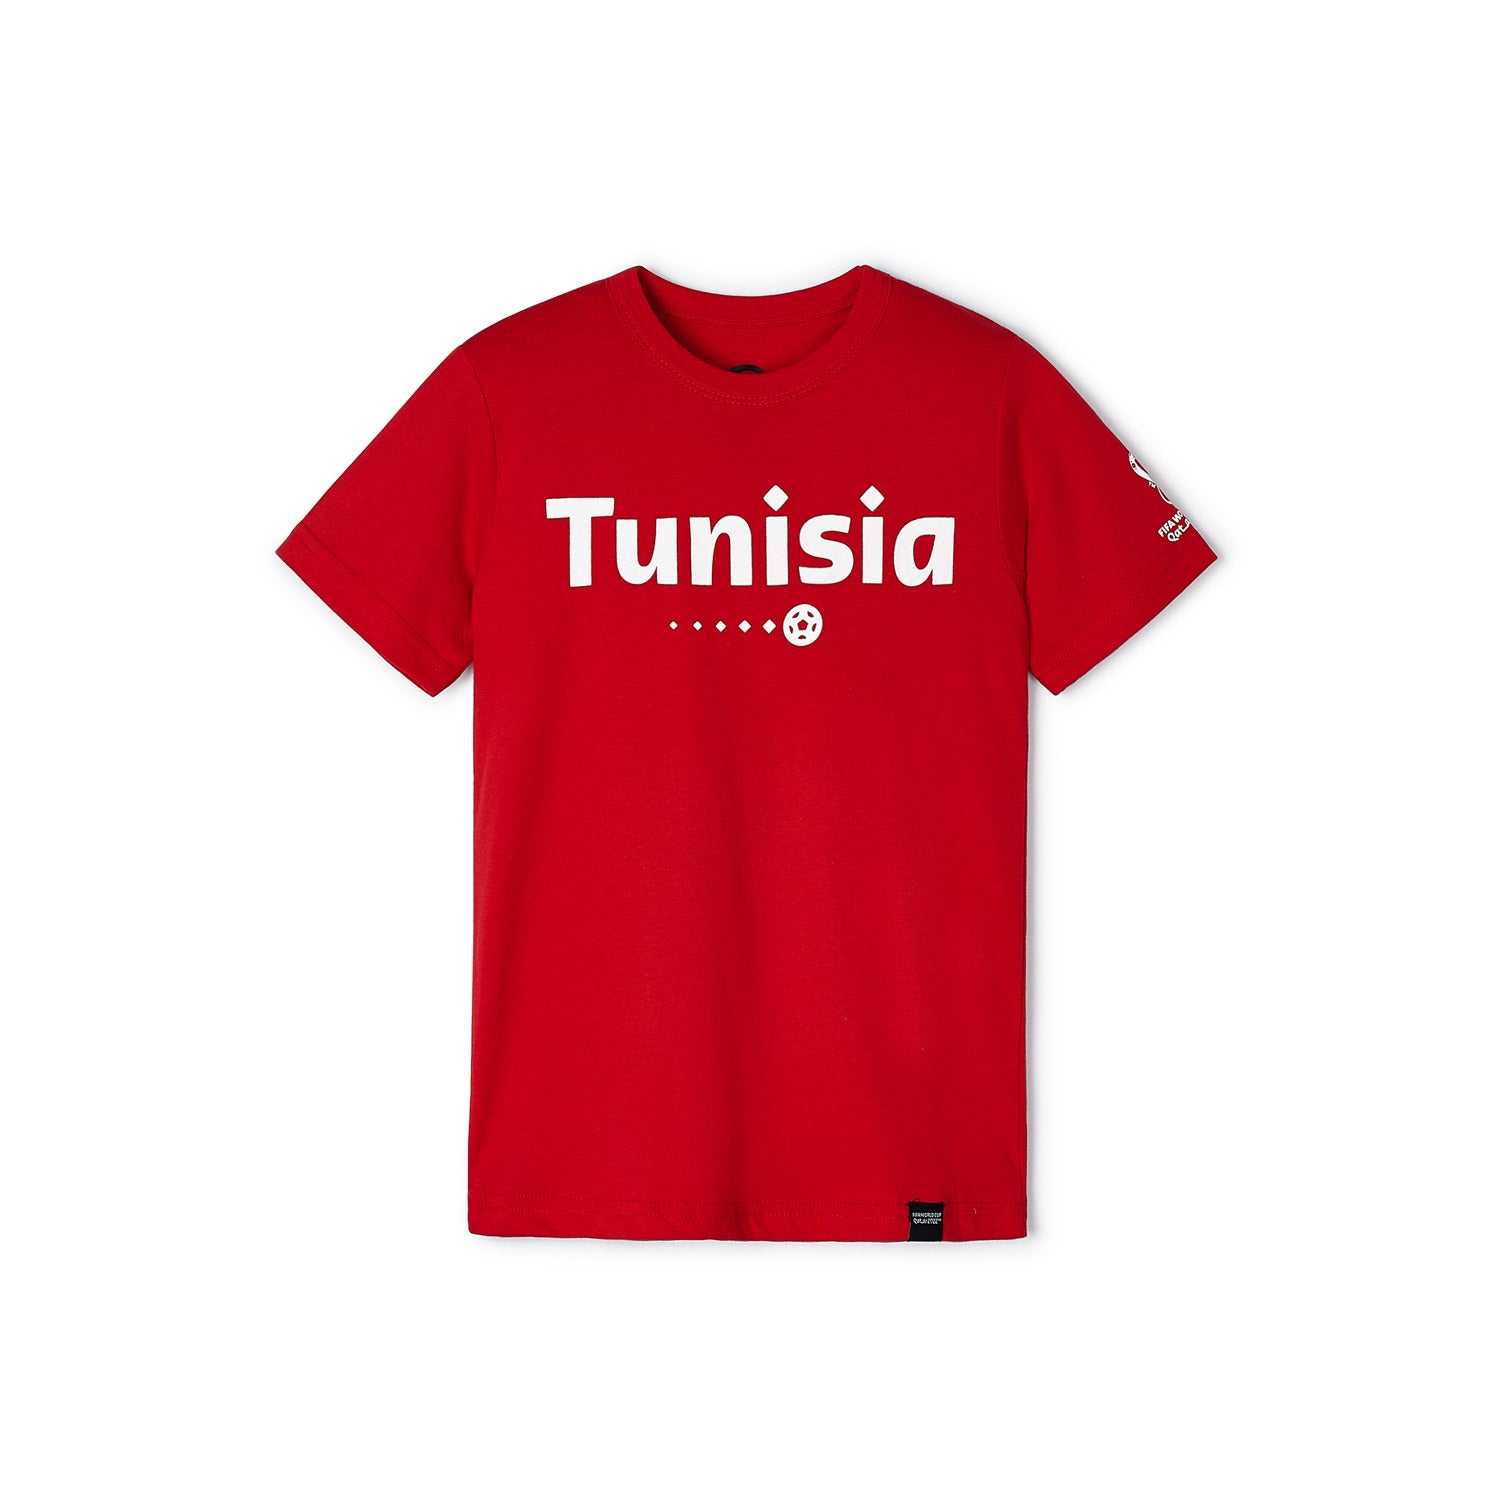 2022 World Cup Tunisia Red T-Shirt - Youth